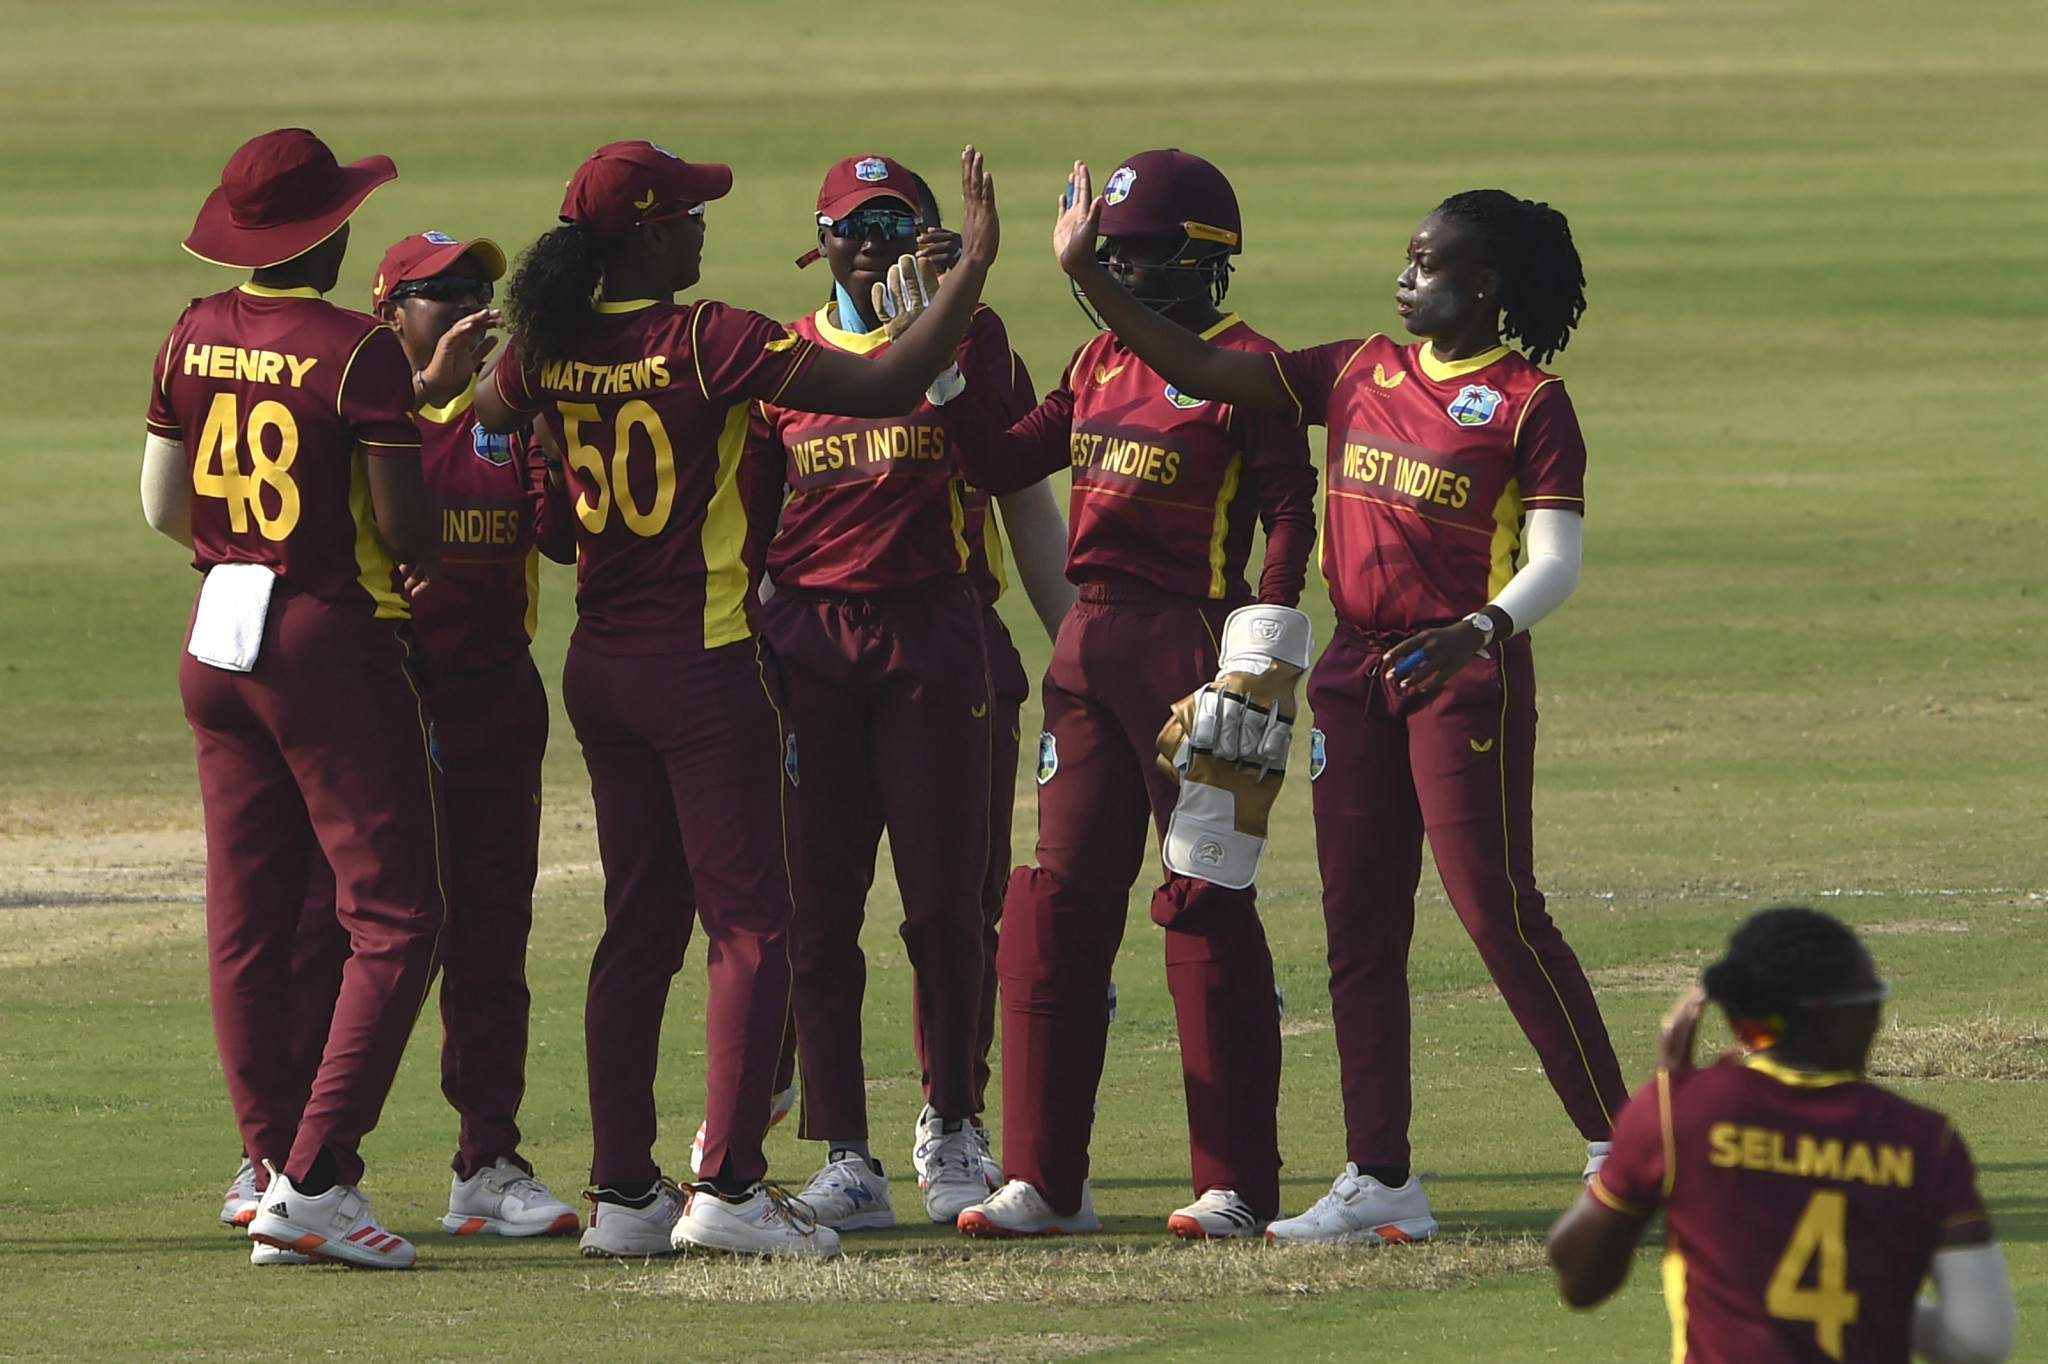 The West Indies will be among the favourites at the qualifier ©Getty Images